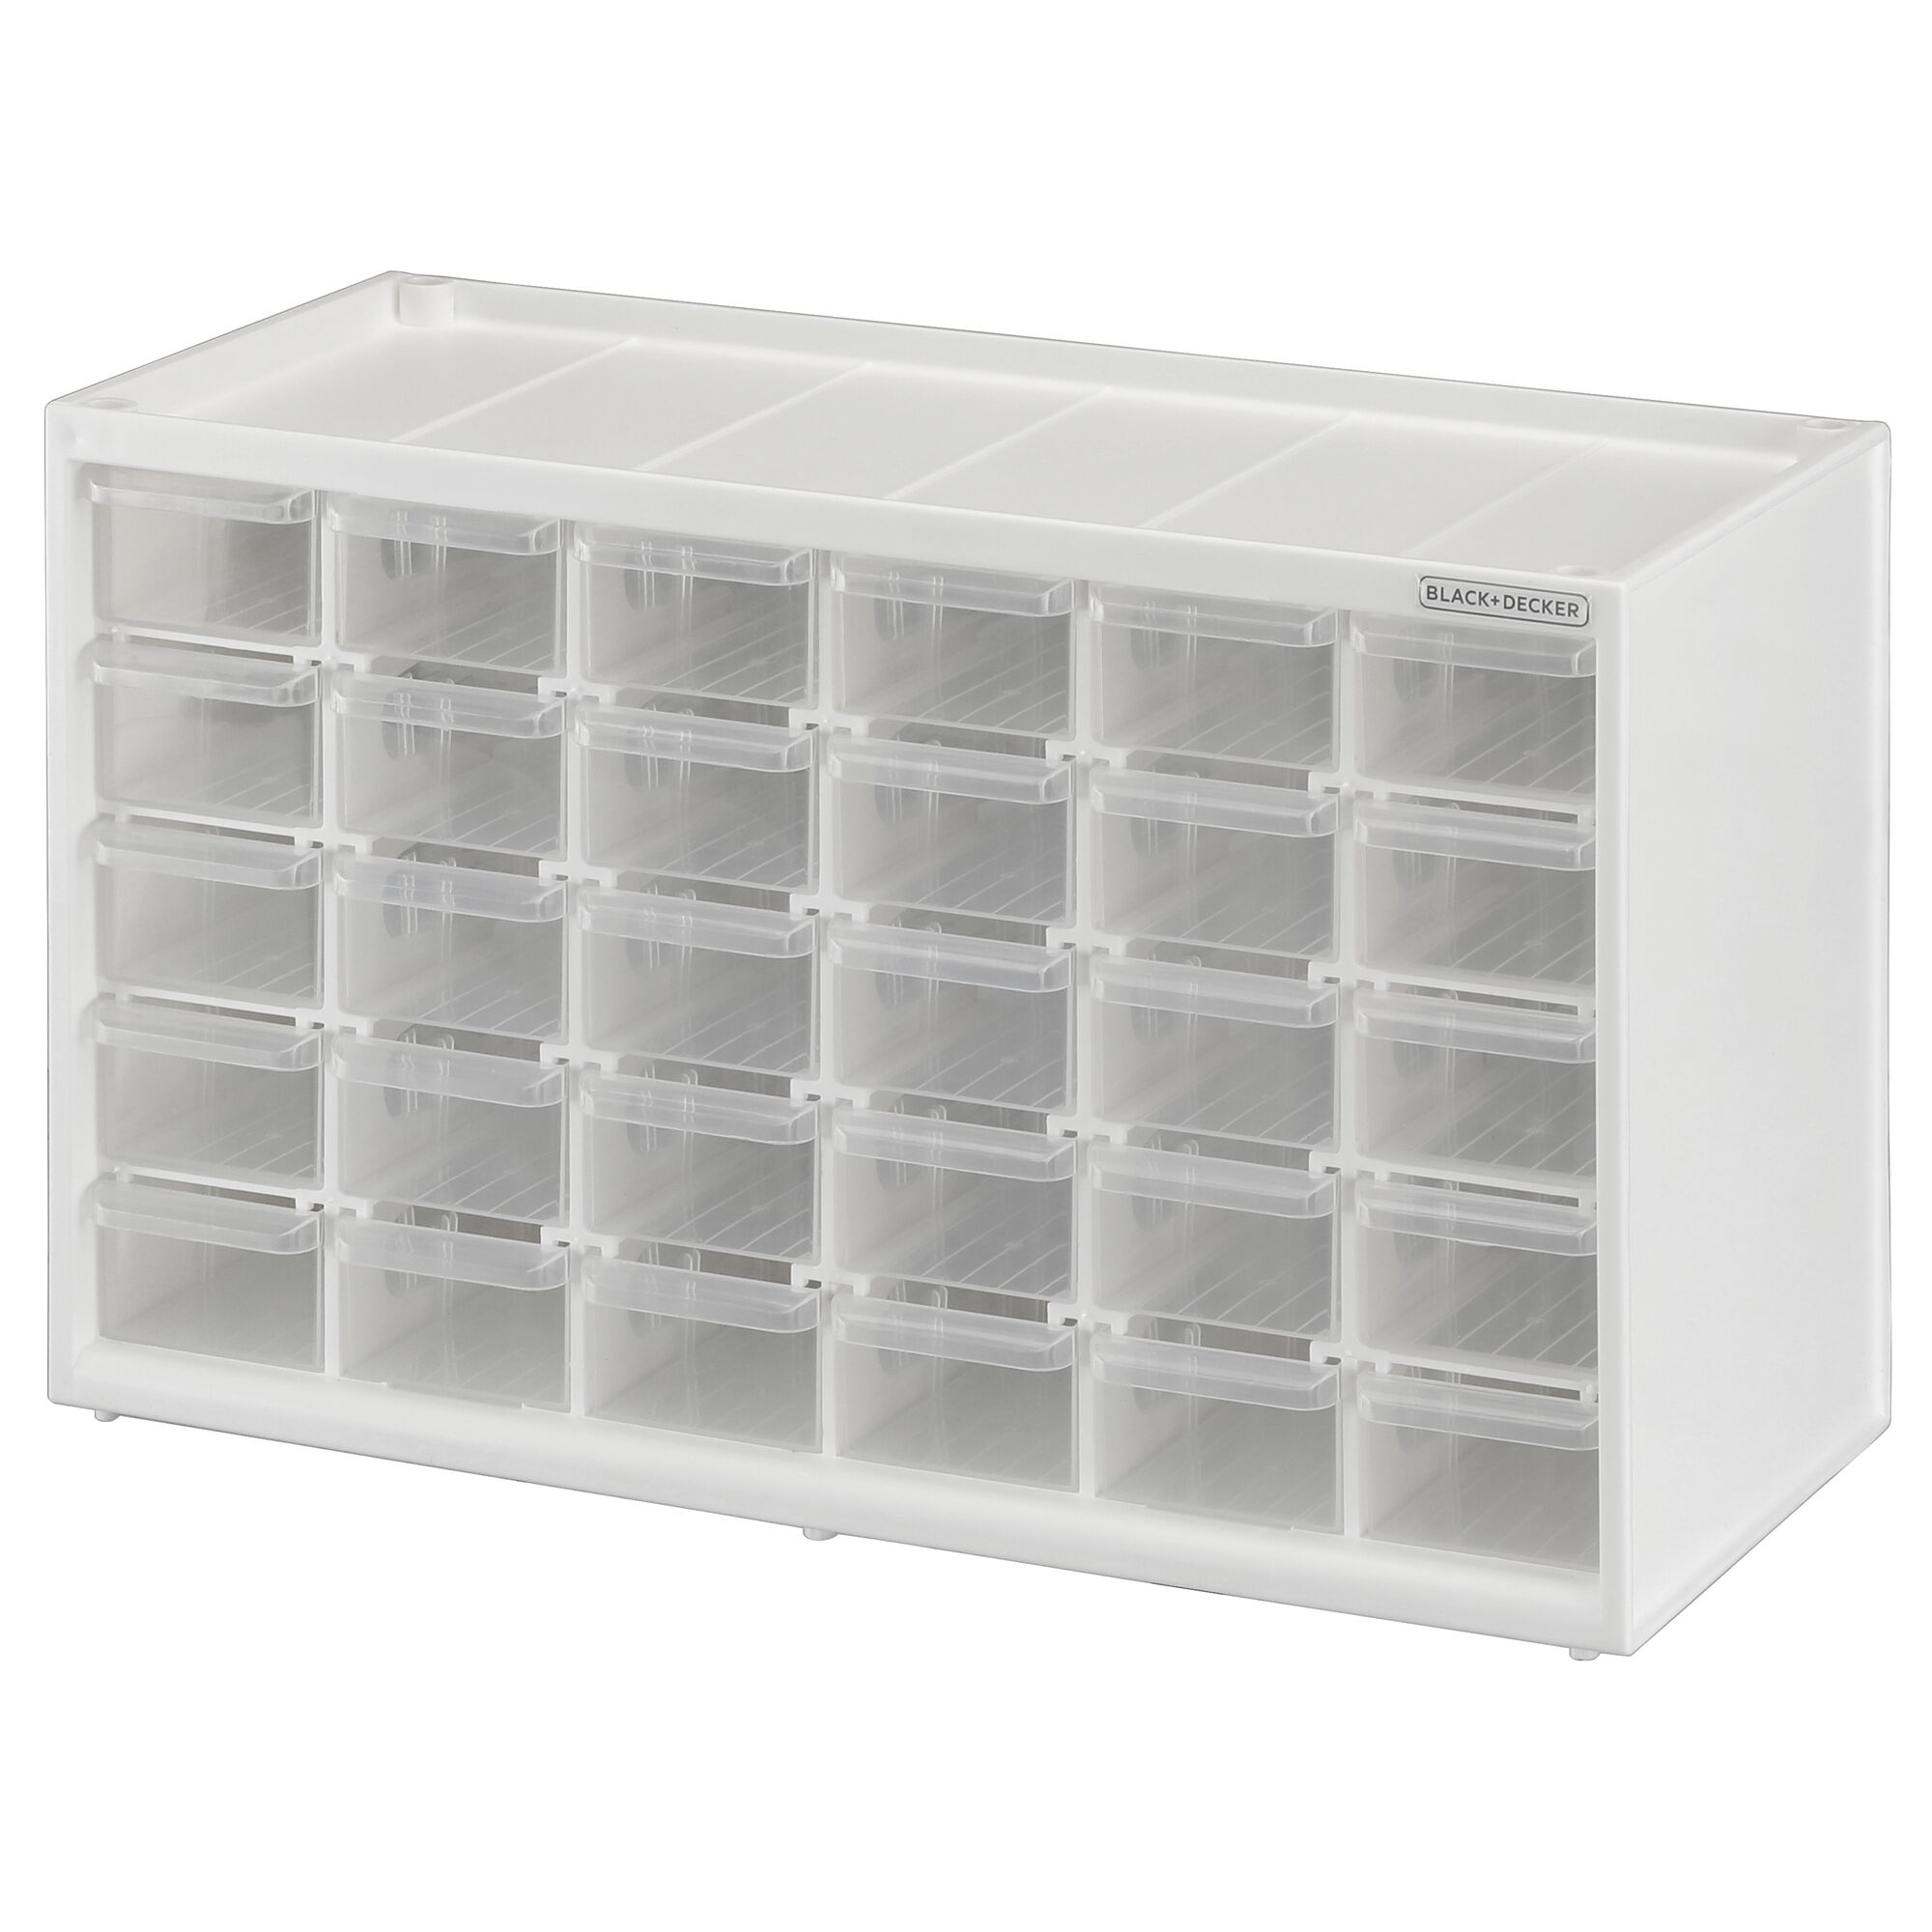 Black and decker Small 30 Drawer Bin System with clear drawers